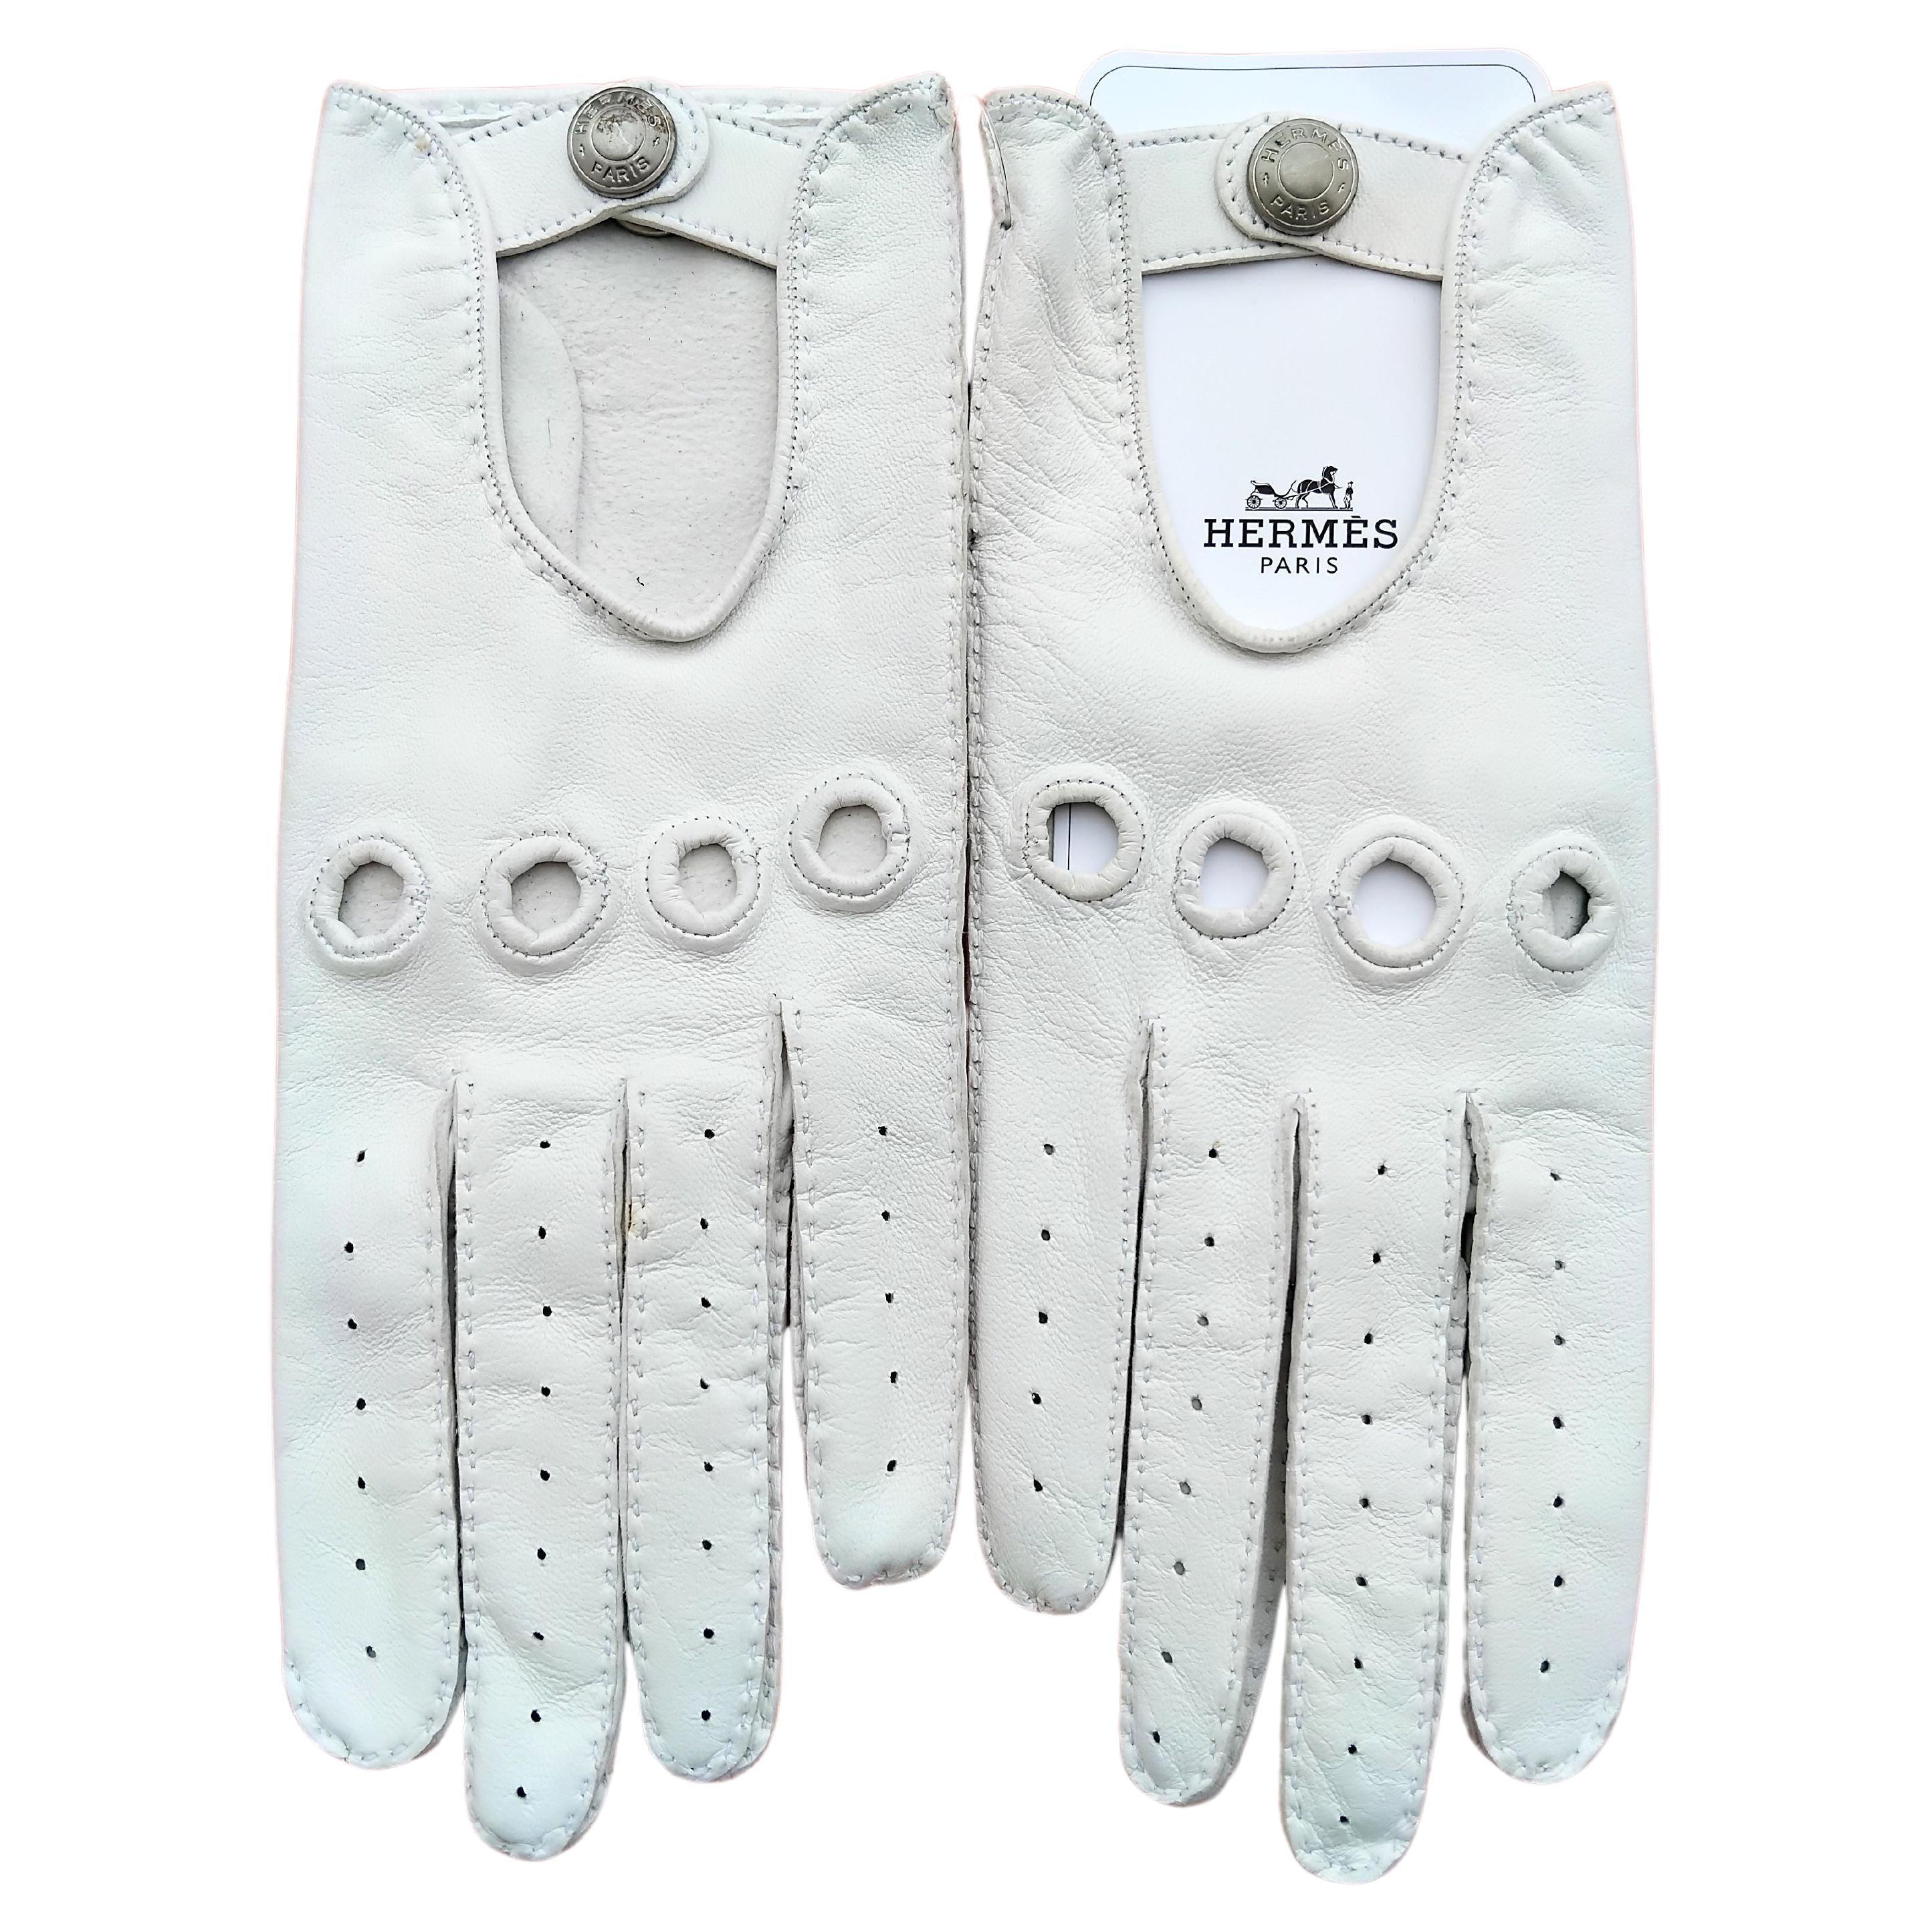 Exceptional Hermès Driving Gloves White Leather Size 7 For Sale